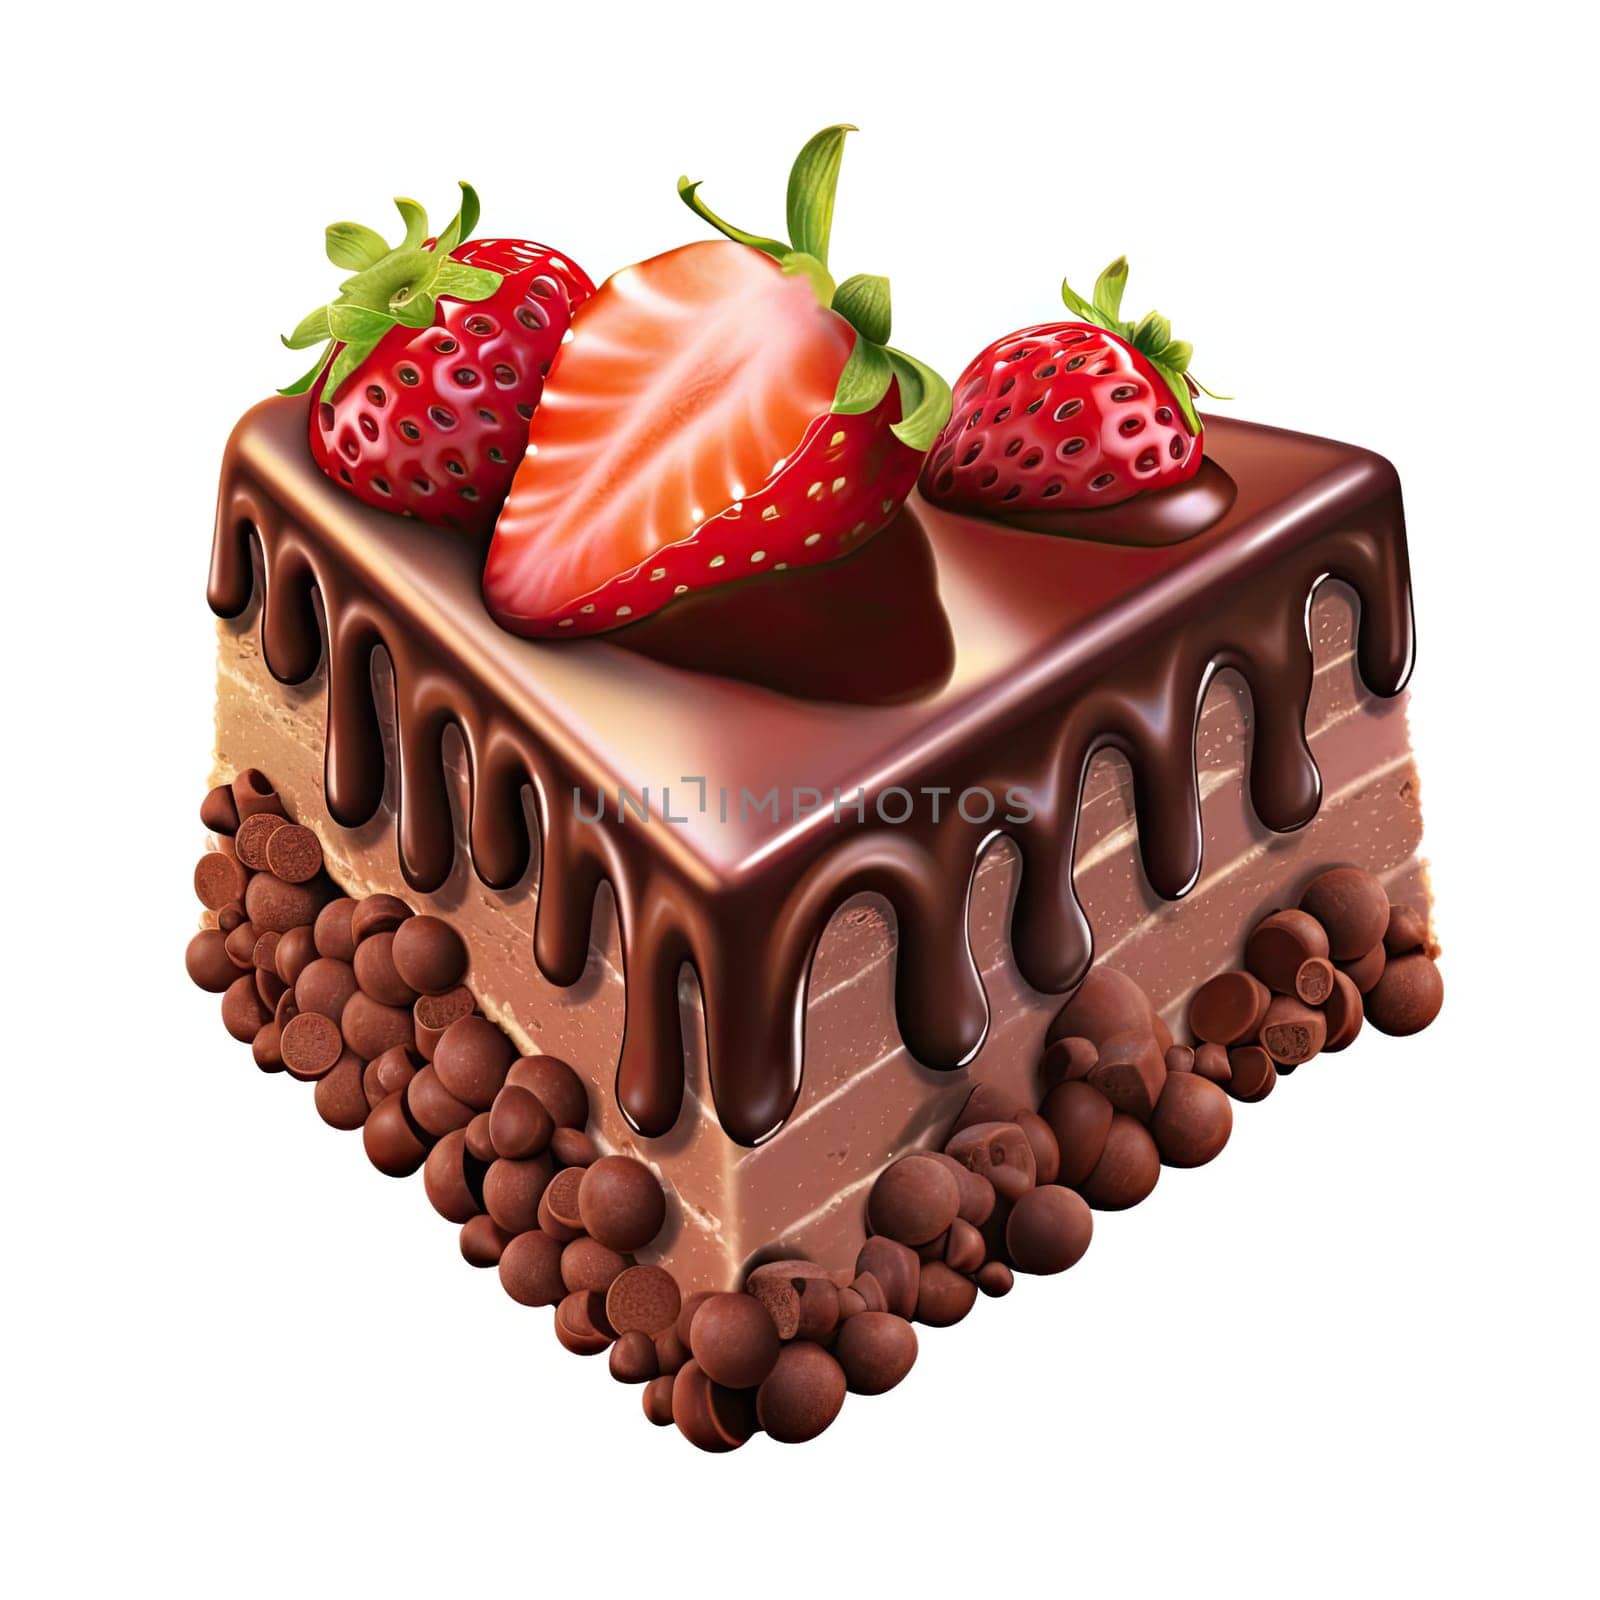 Chocolate cake with strawberries on a white background - vector illustration (ID: 001329)